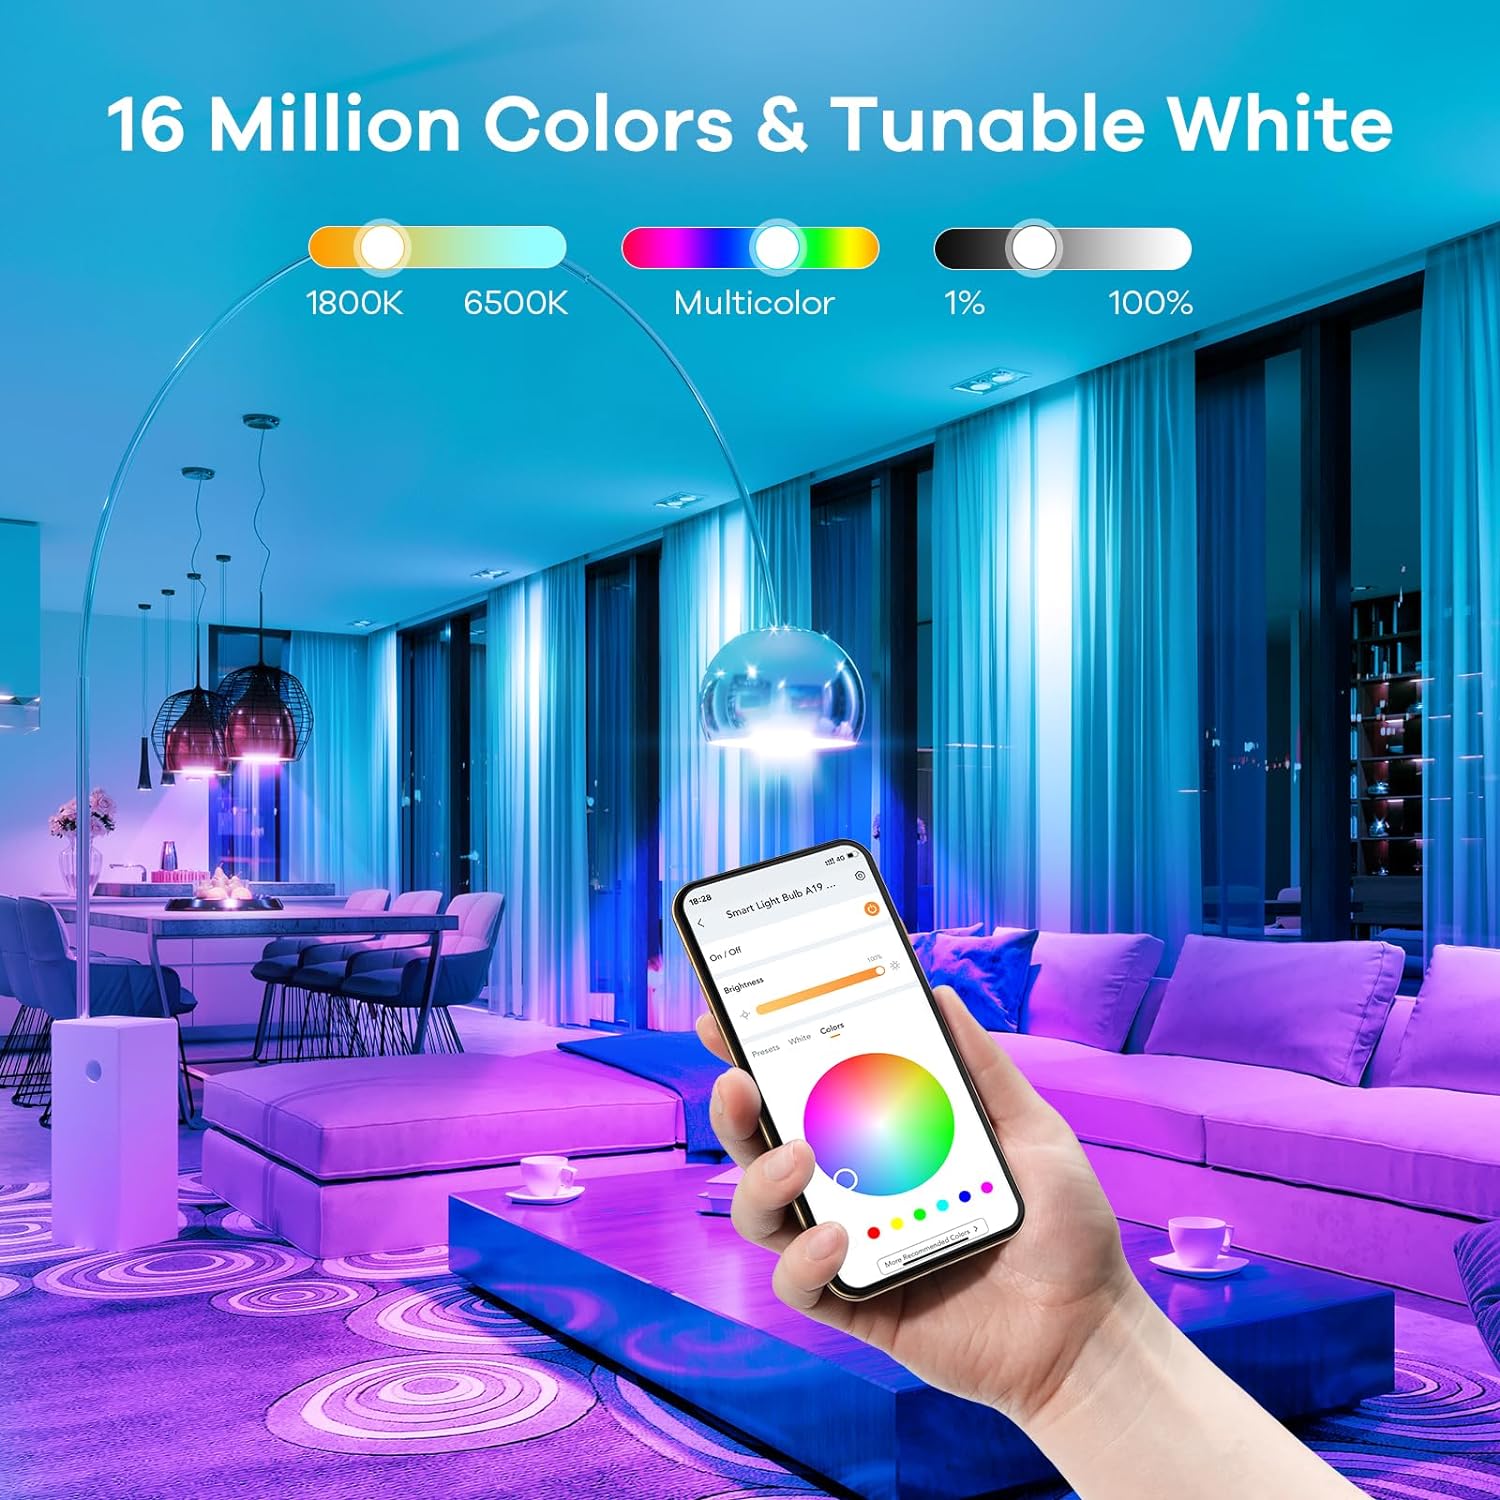 Linkind Smart Light Bulbs, Smart Bulb That Work with Alexa & Google Home, LED Light Bulbs Color Changing, Dynamic Preset Scenes, A19 E26 2.4Ghz RGBTW WiFi Light Bulbs Dimmable 60W, 800 Lumen, 4 Pack